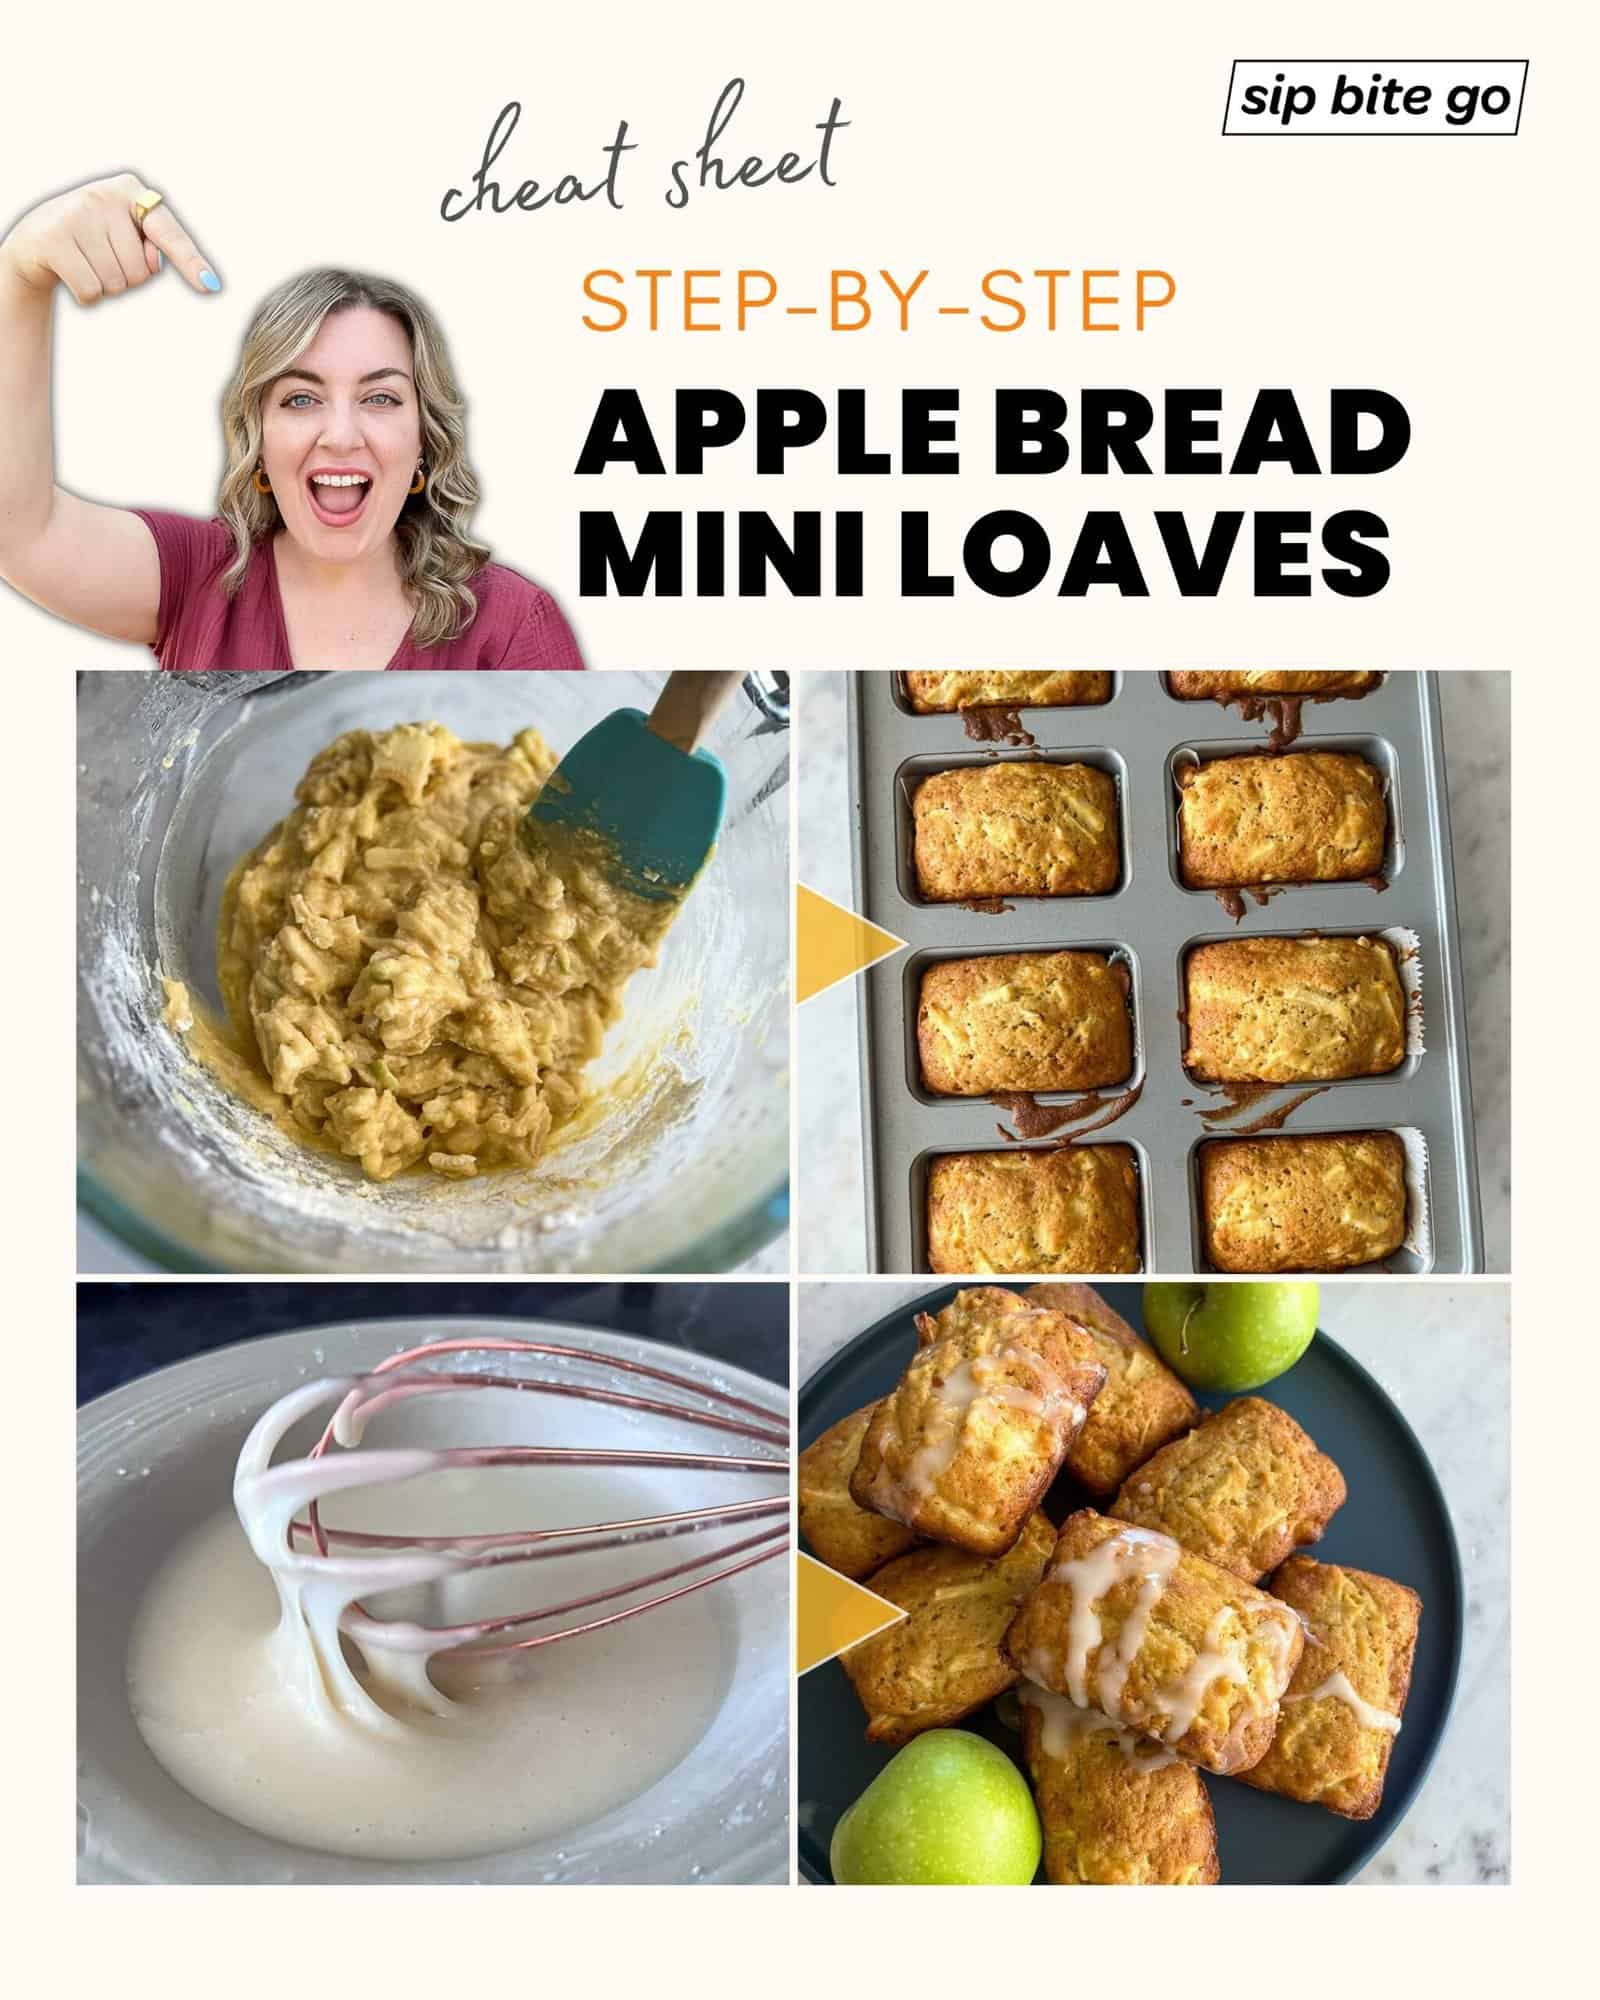 Infographic with recipe steps to make Apple Bread Mini Loaves